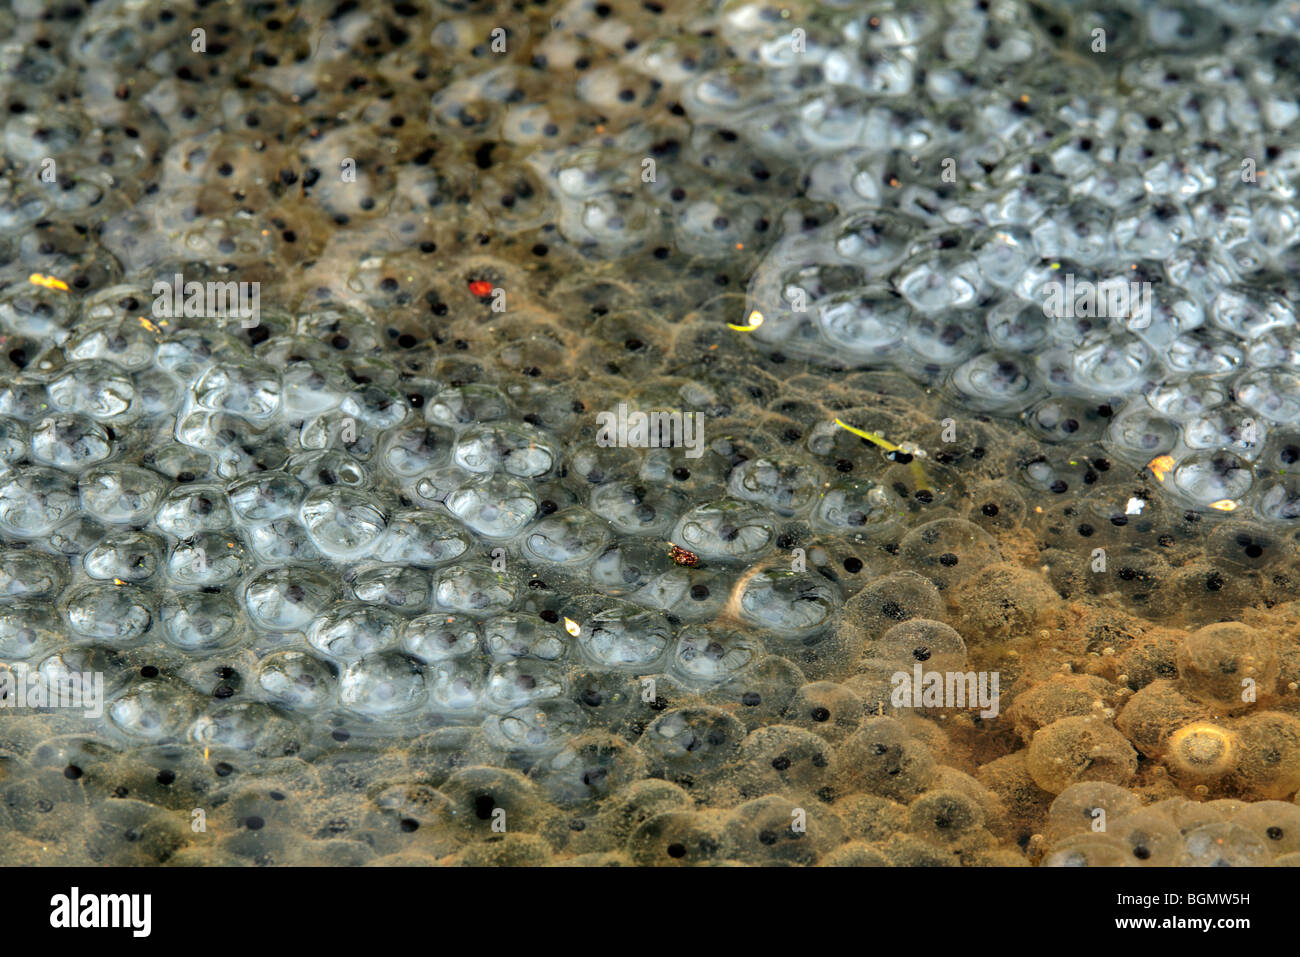 Common frog frogspawn (Rana temporaria) clump in pond Stock Photo